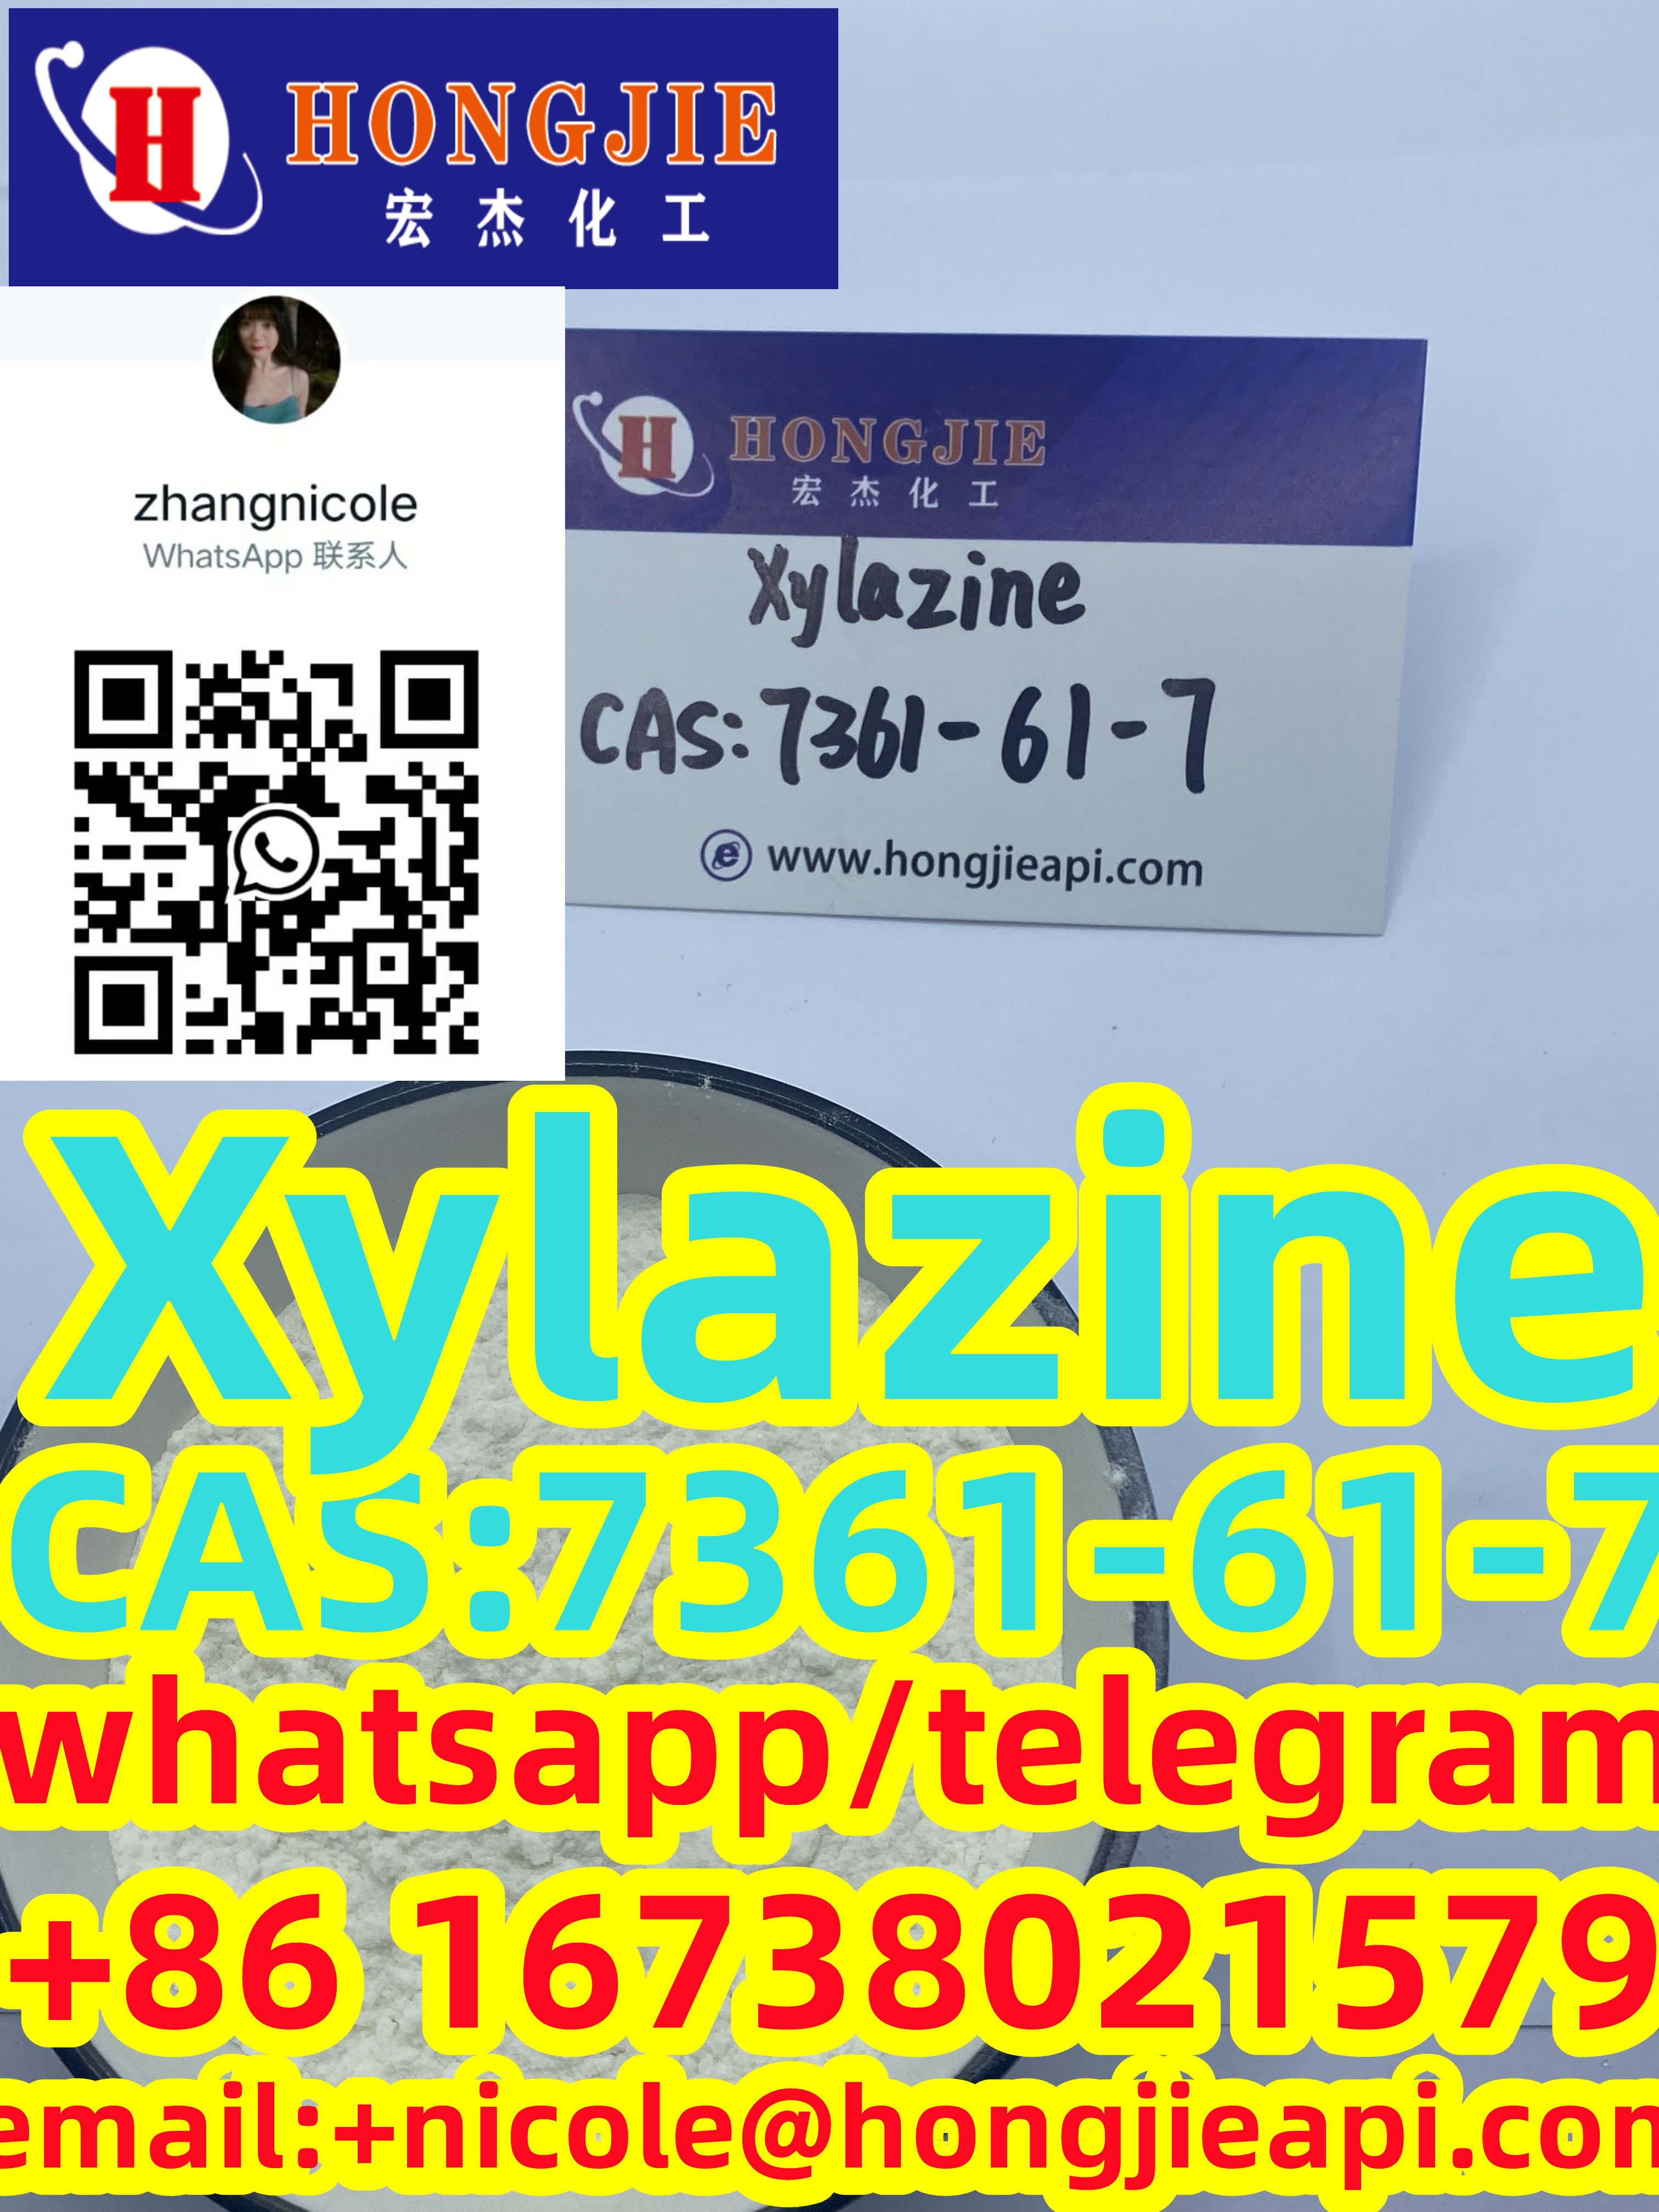 Best Price and High Purity 7361-61-7 Xylazine with Safe Delivery